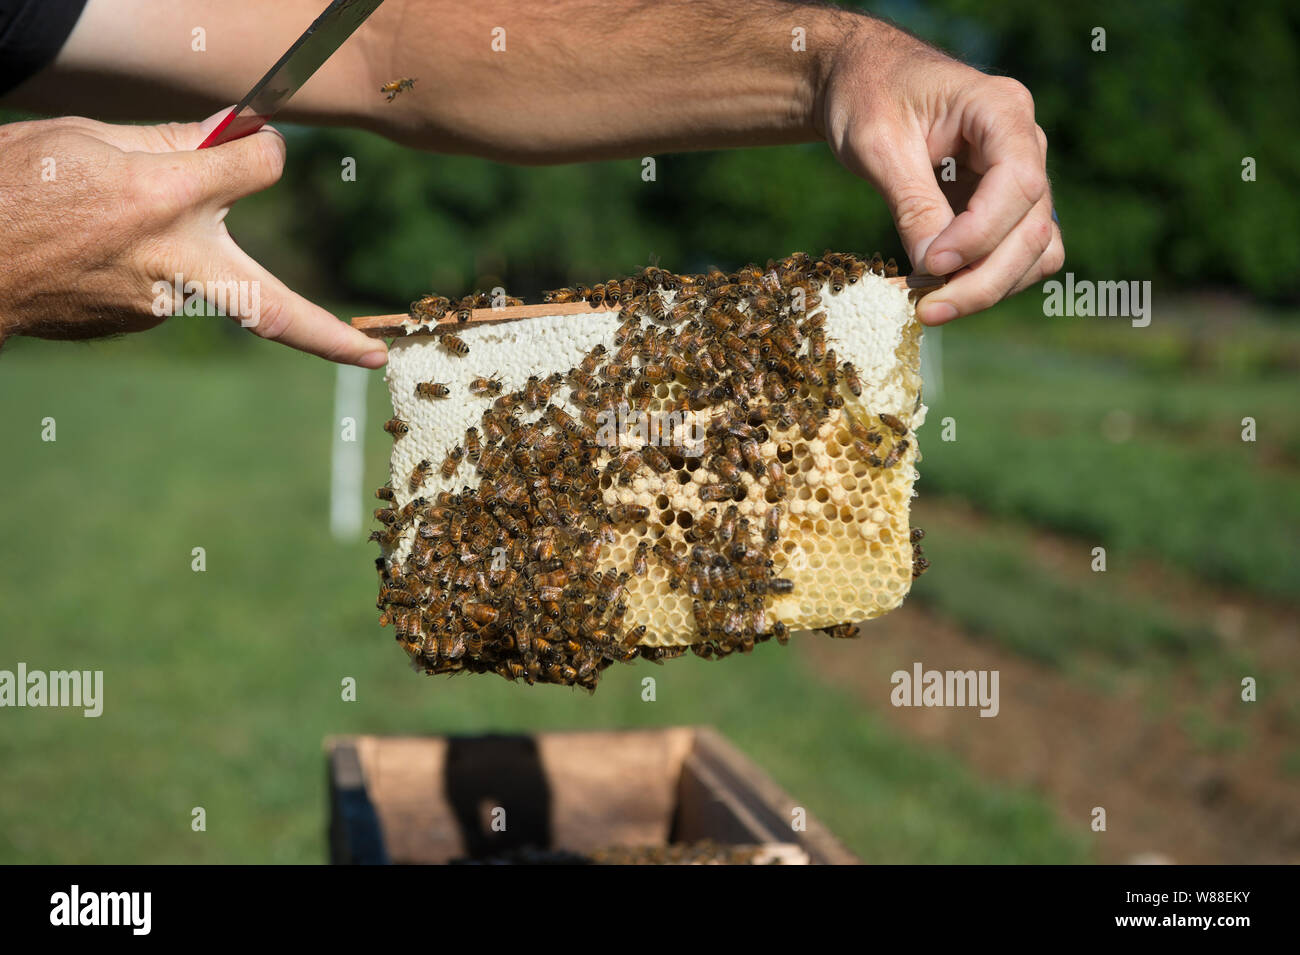 UNITED STATES - June 11, 2019: Kasey Clark checks his unique bee hive know as a top bar hive. A basic setup with bees can cost more than $200, and bui Stock Photo